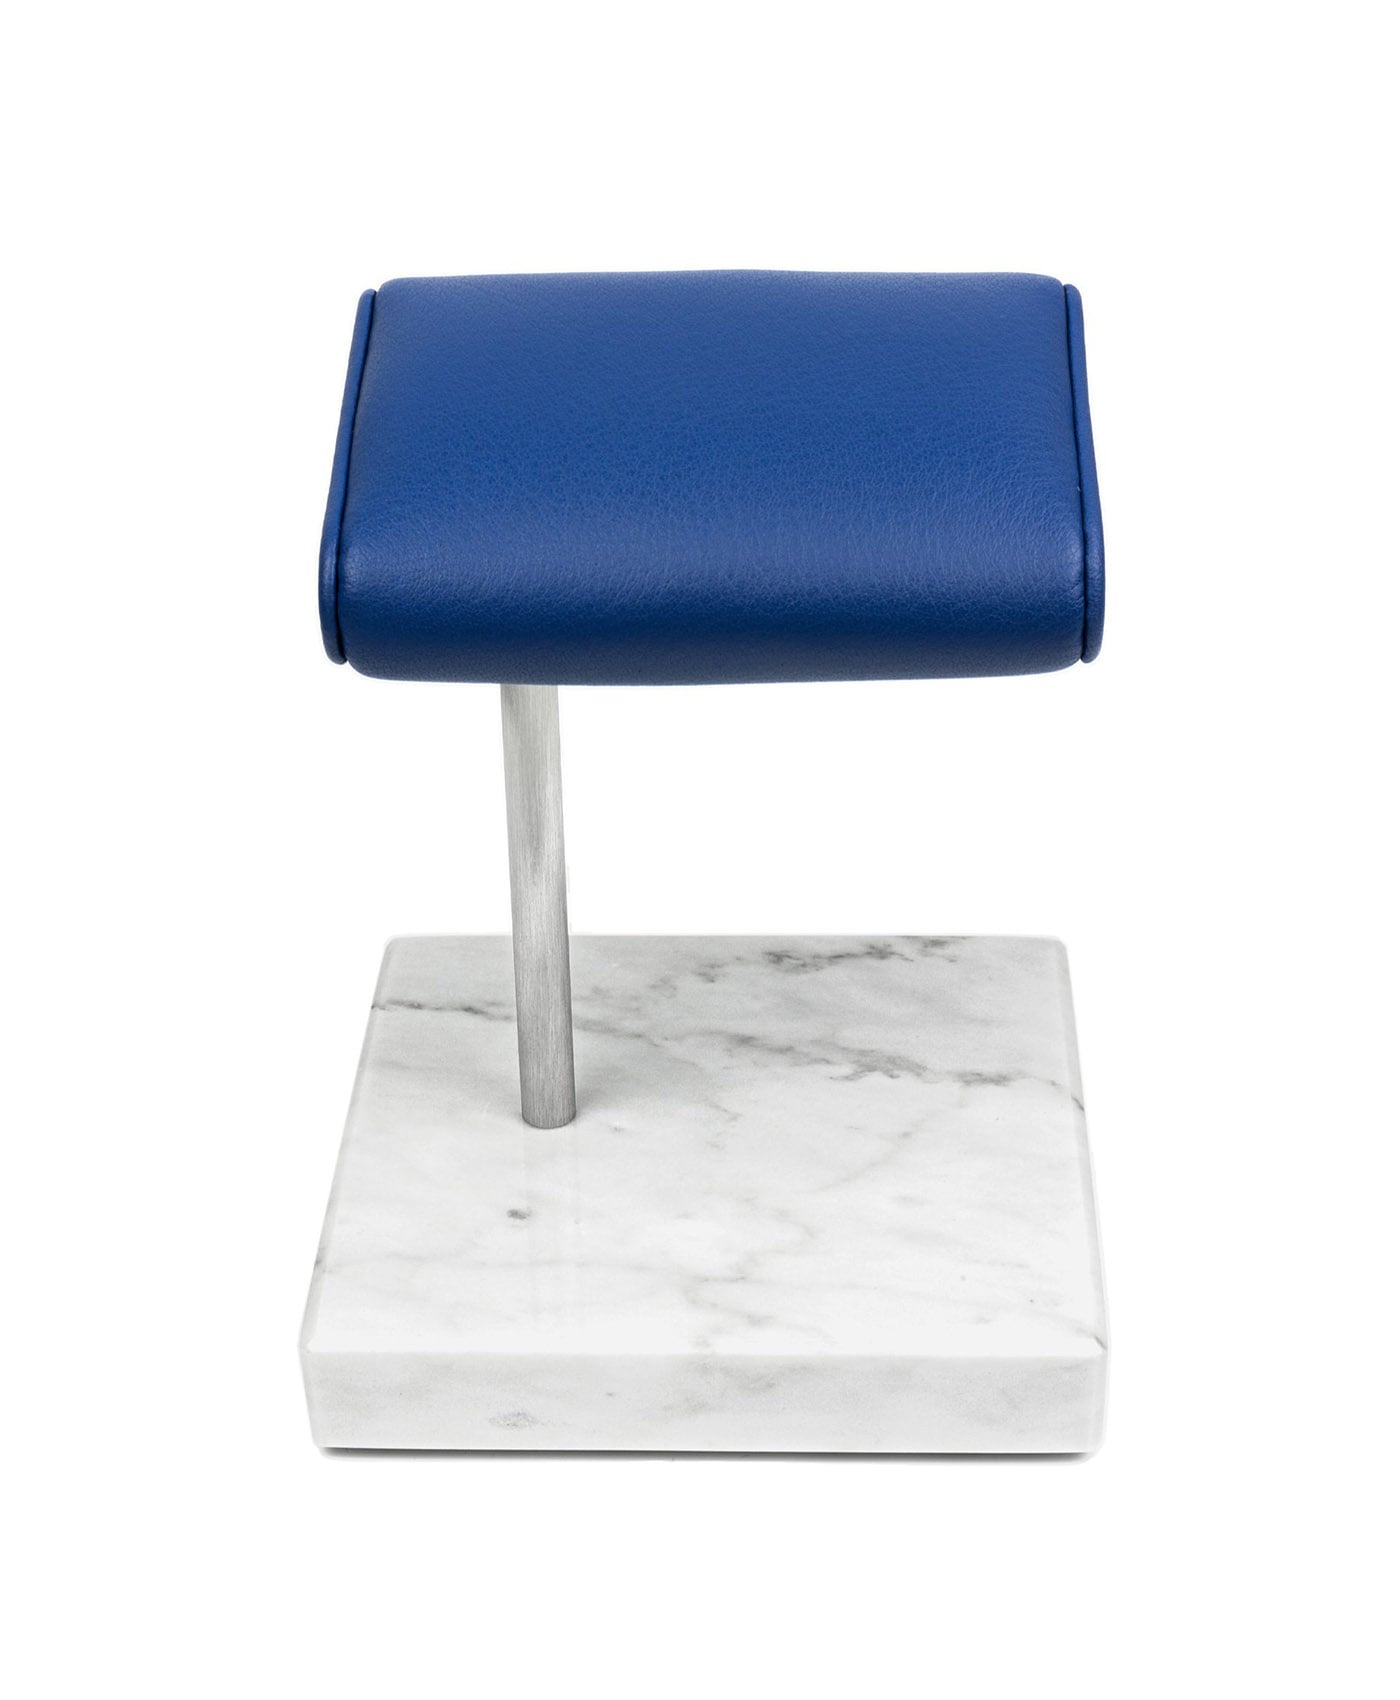 The Watch Stand - Single Stand - Silver & Blue2-min